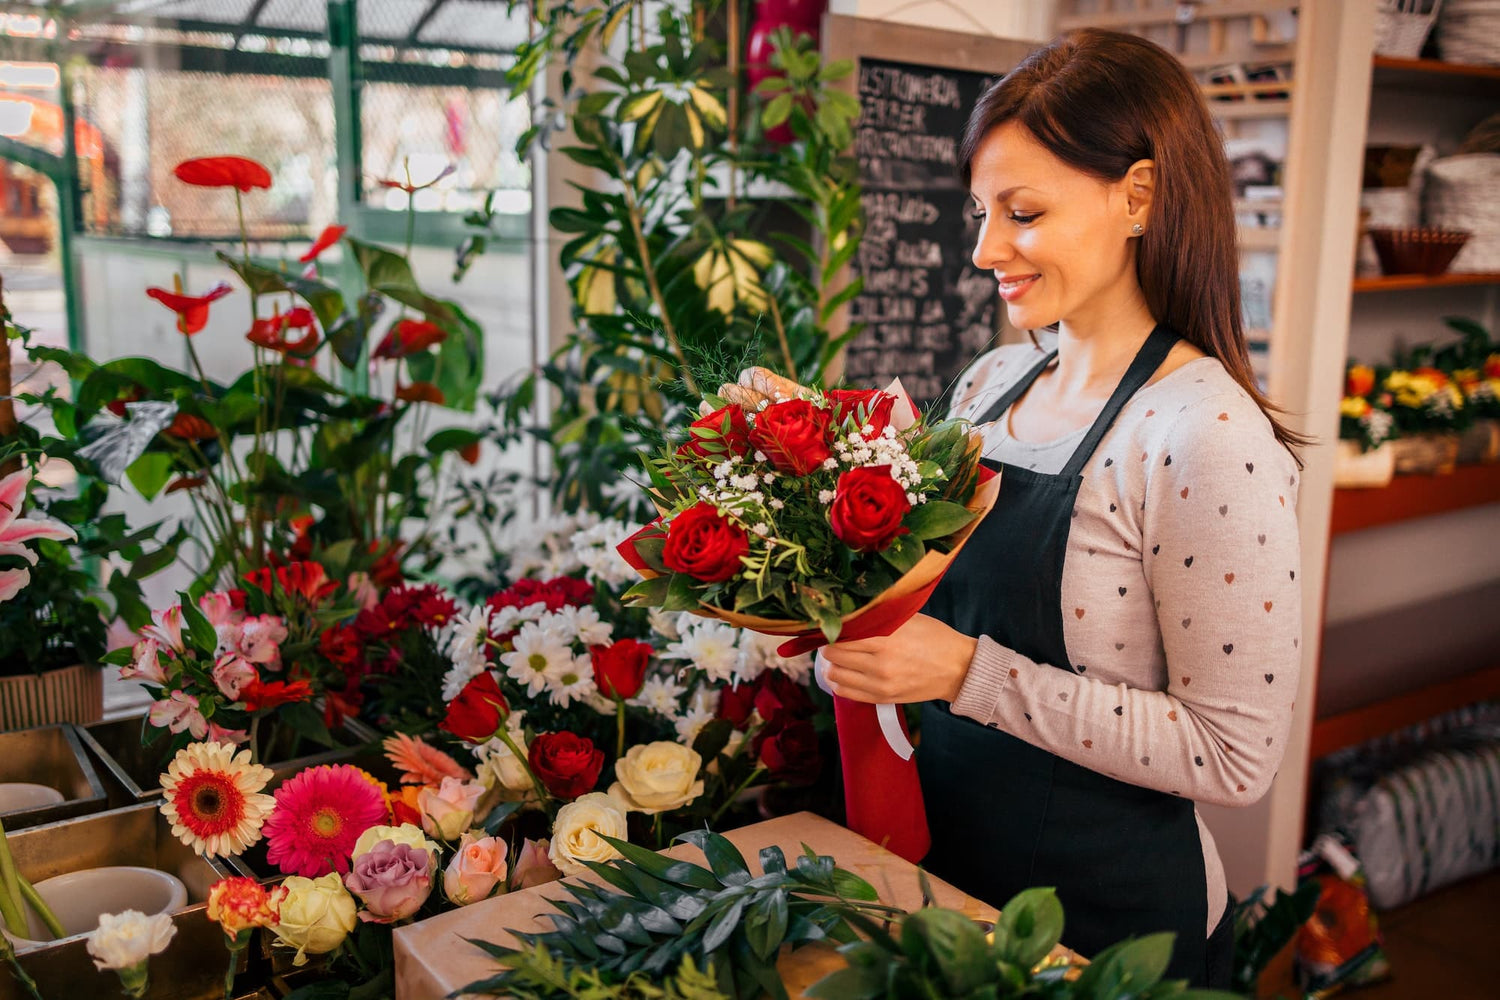 Florist holding a bouquet with roses, while standing surrounded with flowers at florist shop.